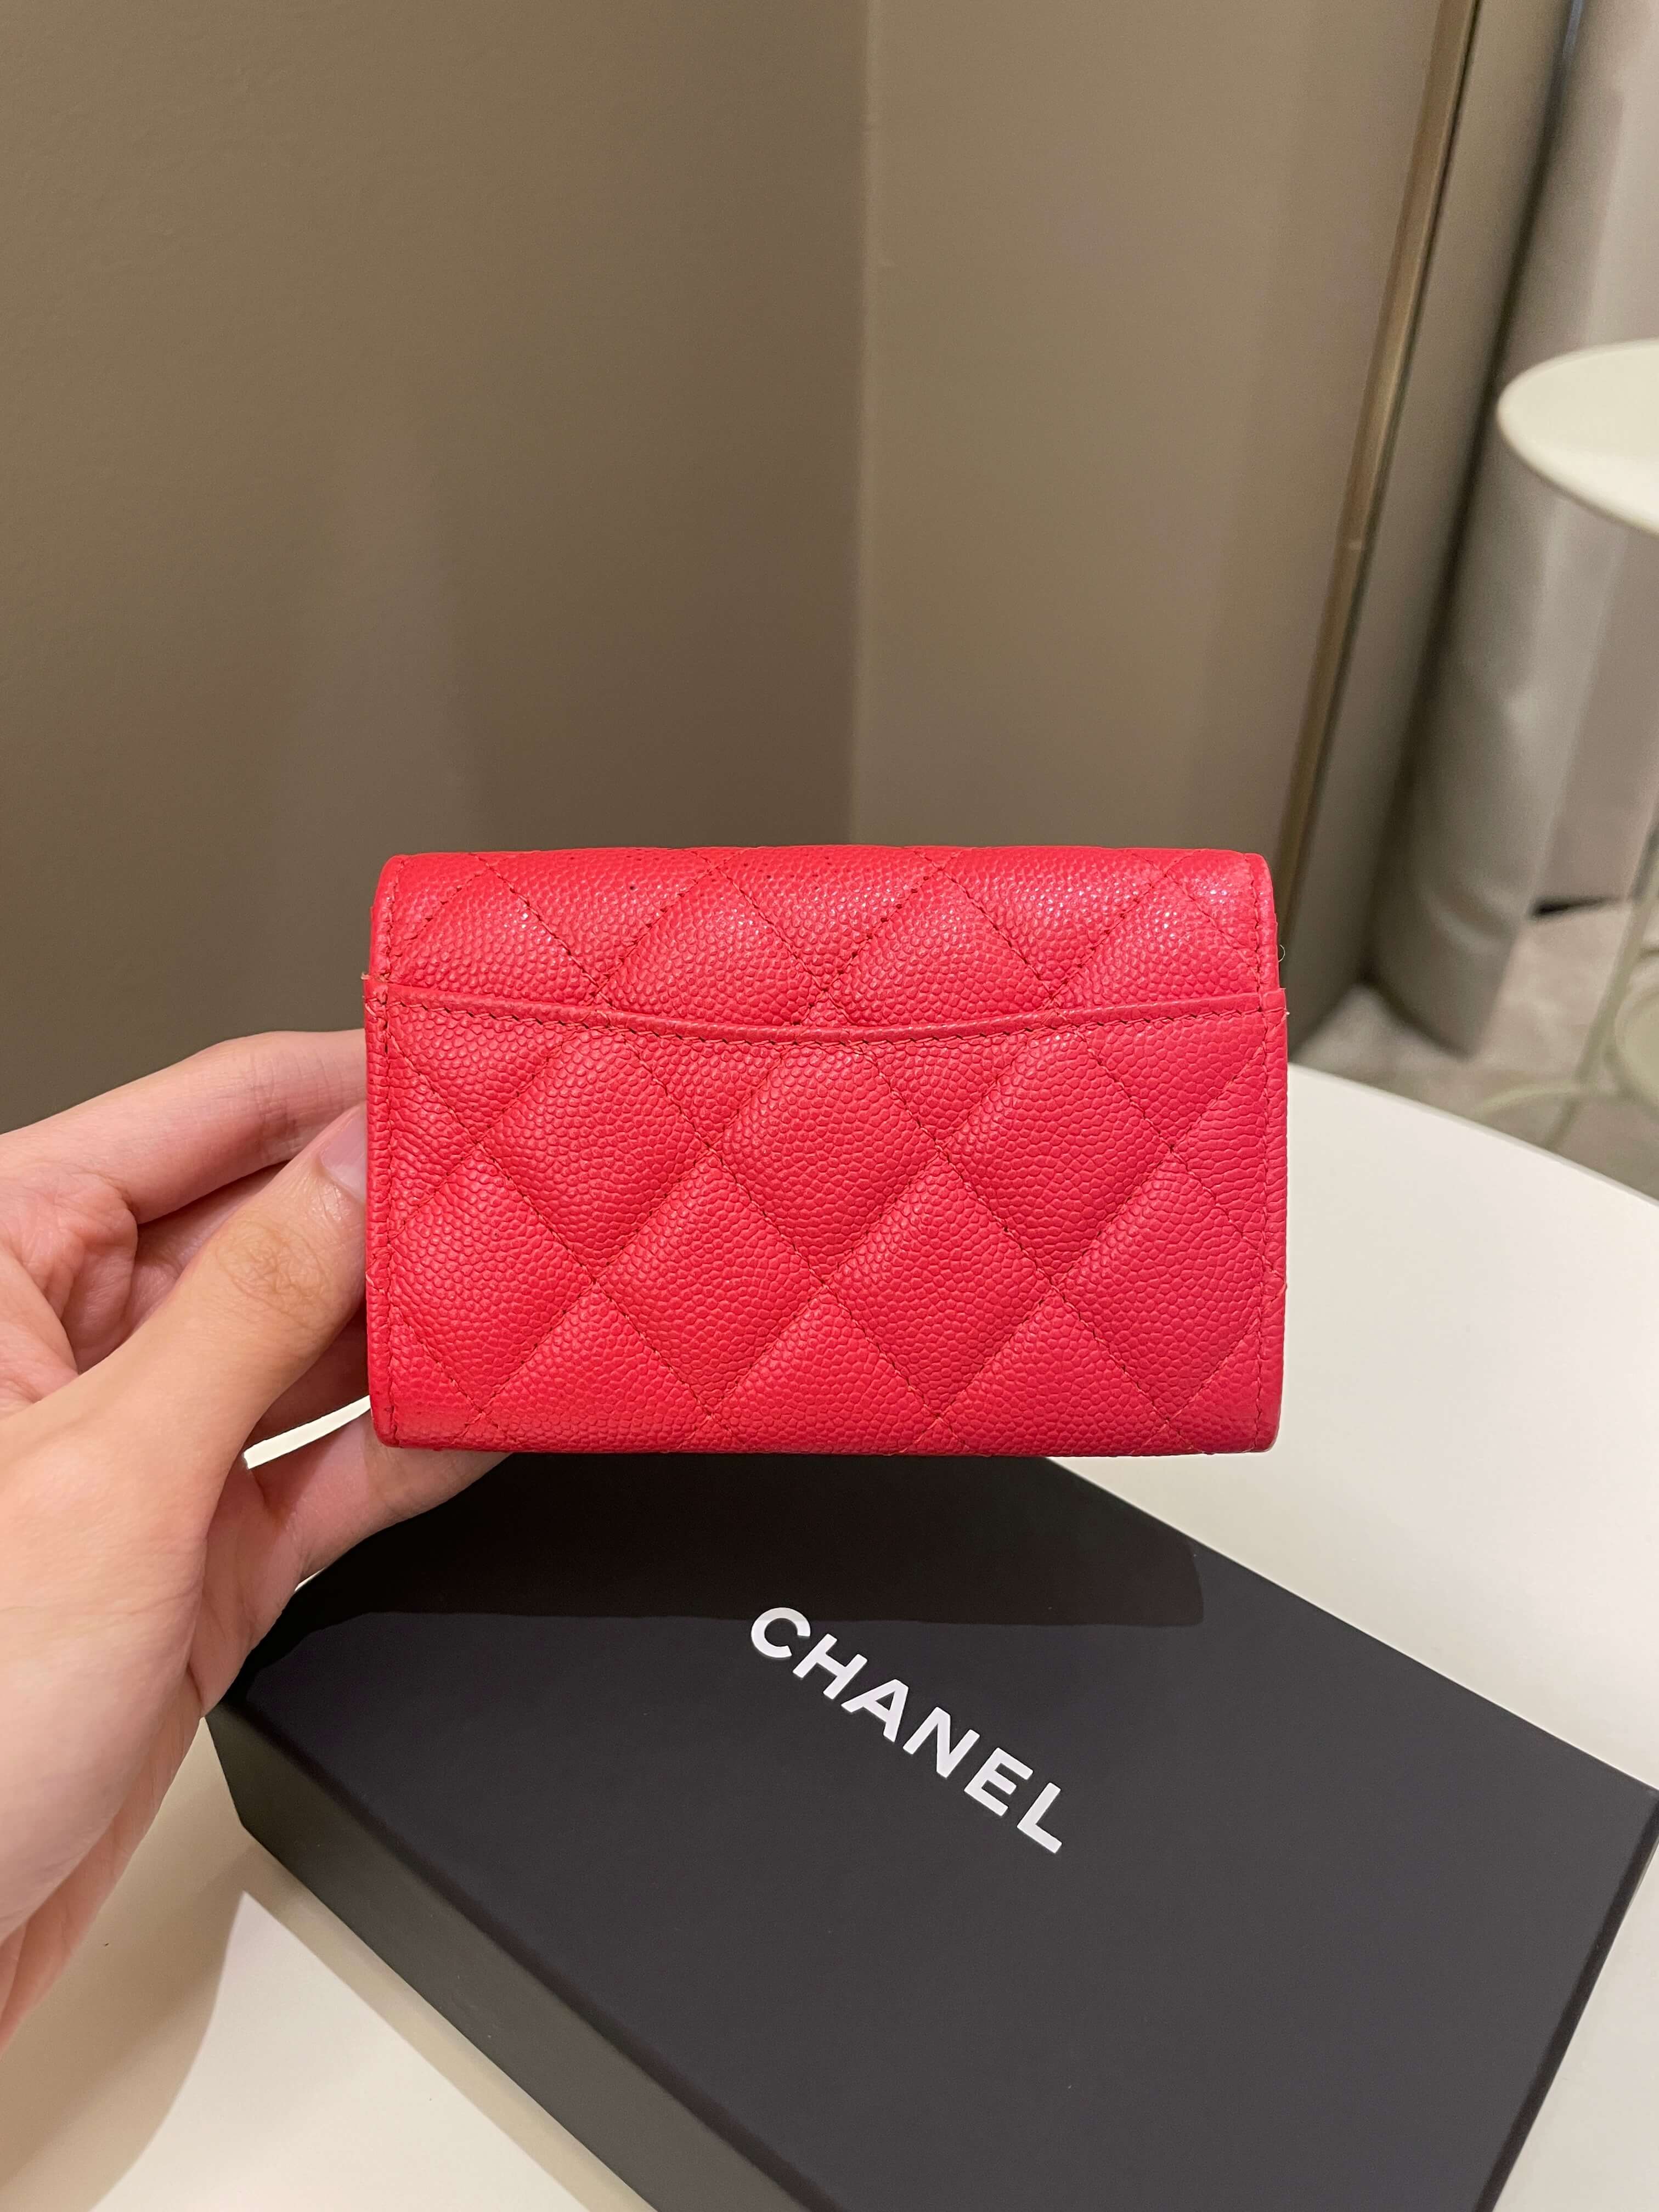 Chanel card holder (classic GHW)